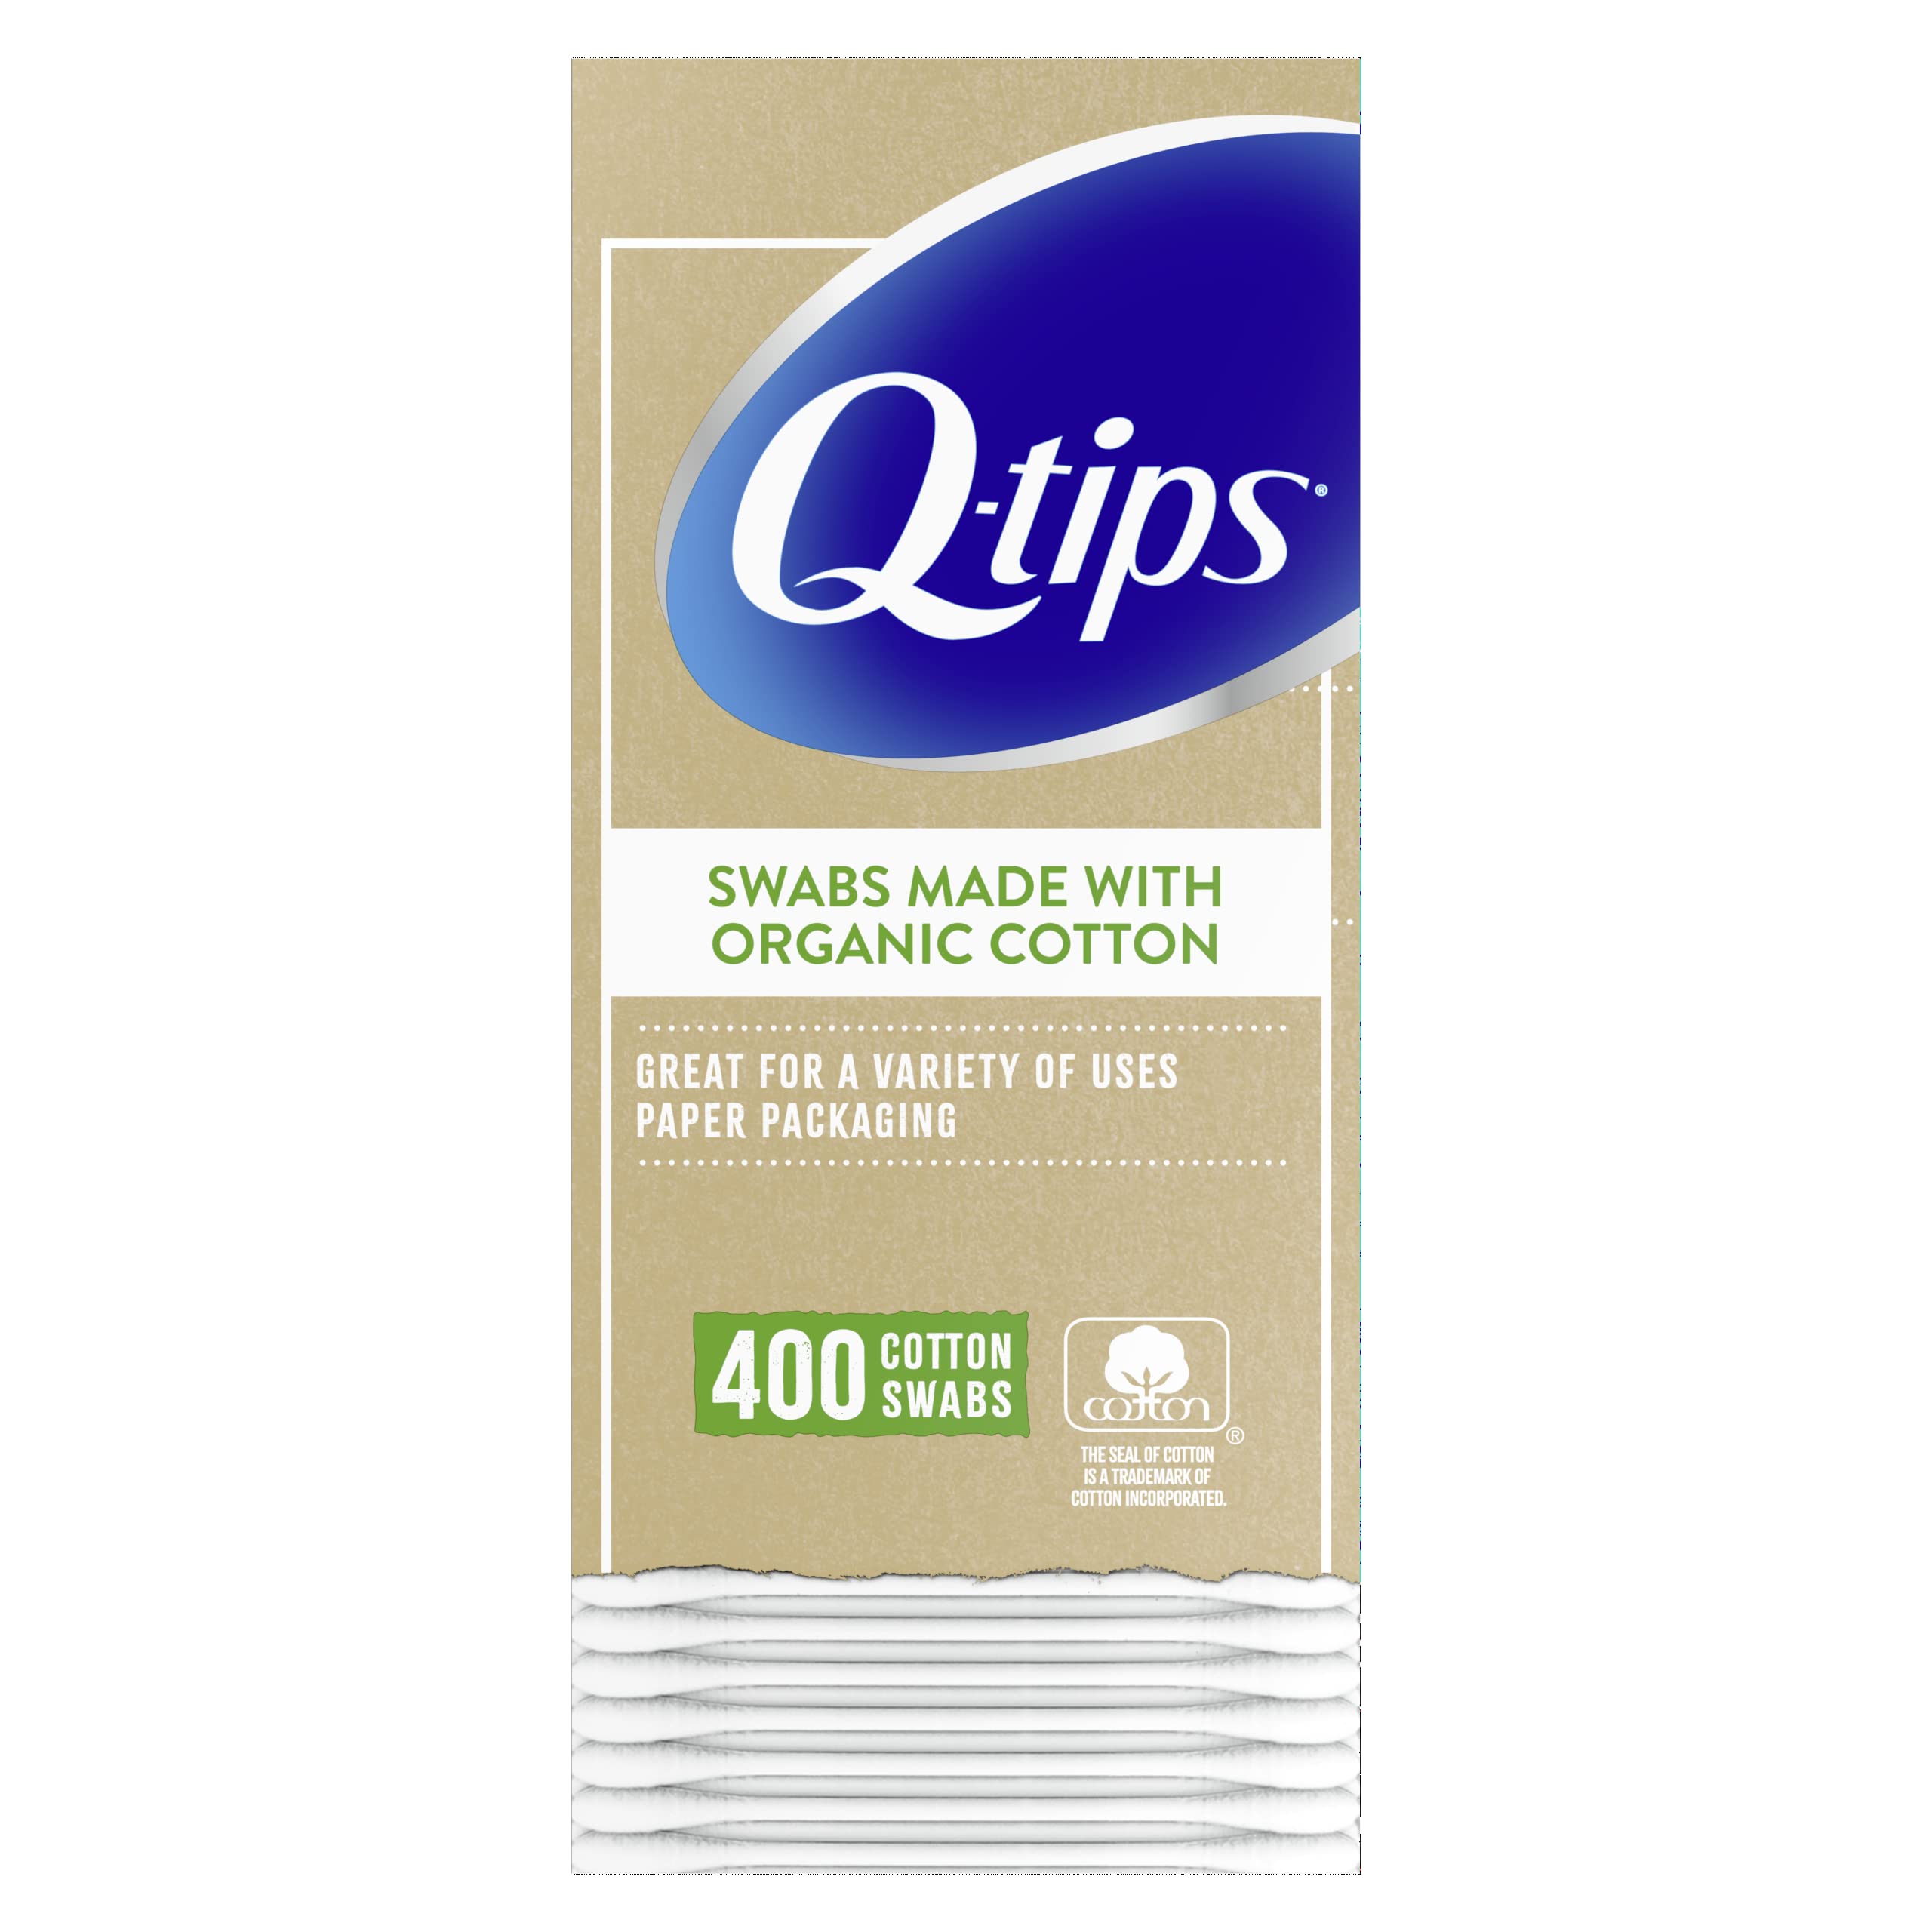 Q-tips Cotton Swabs Organic Swab Ultimate Home and Beauty Tool Made from Organic Cotton, Paper Pack of 1 (4 units)